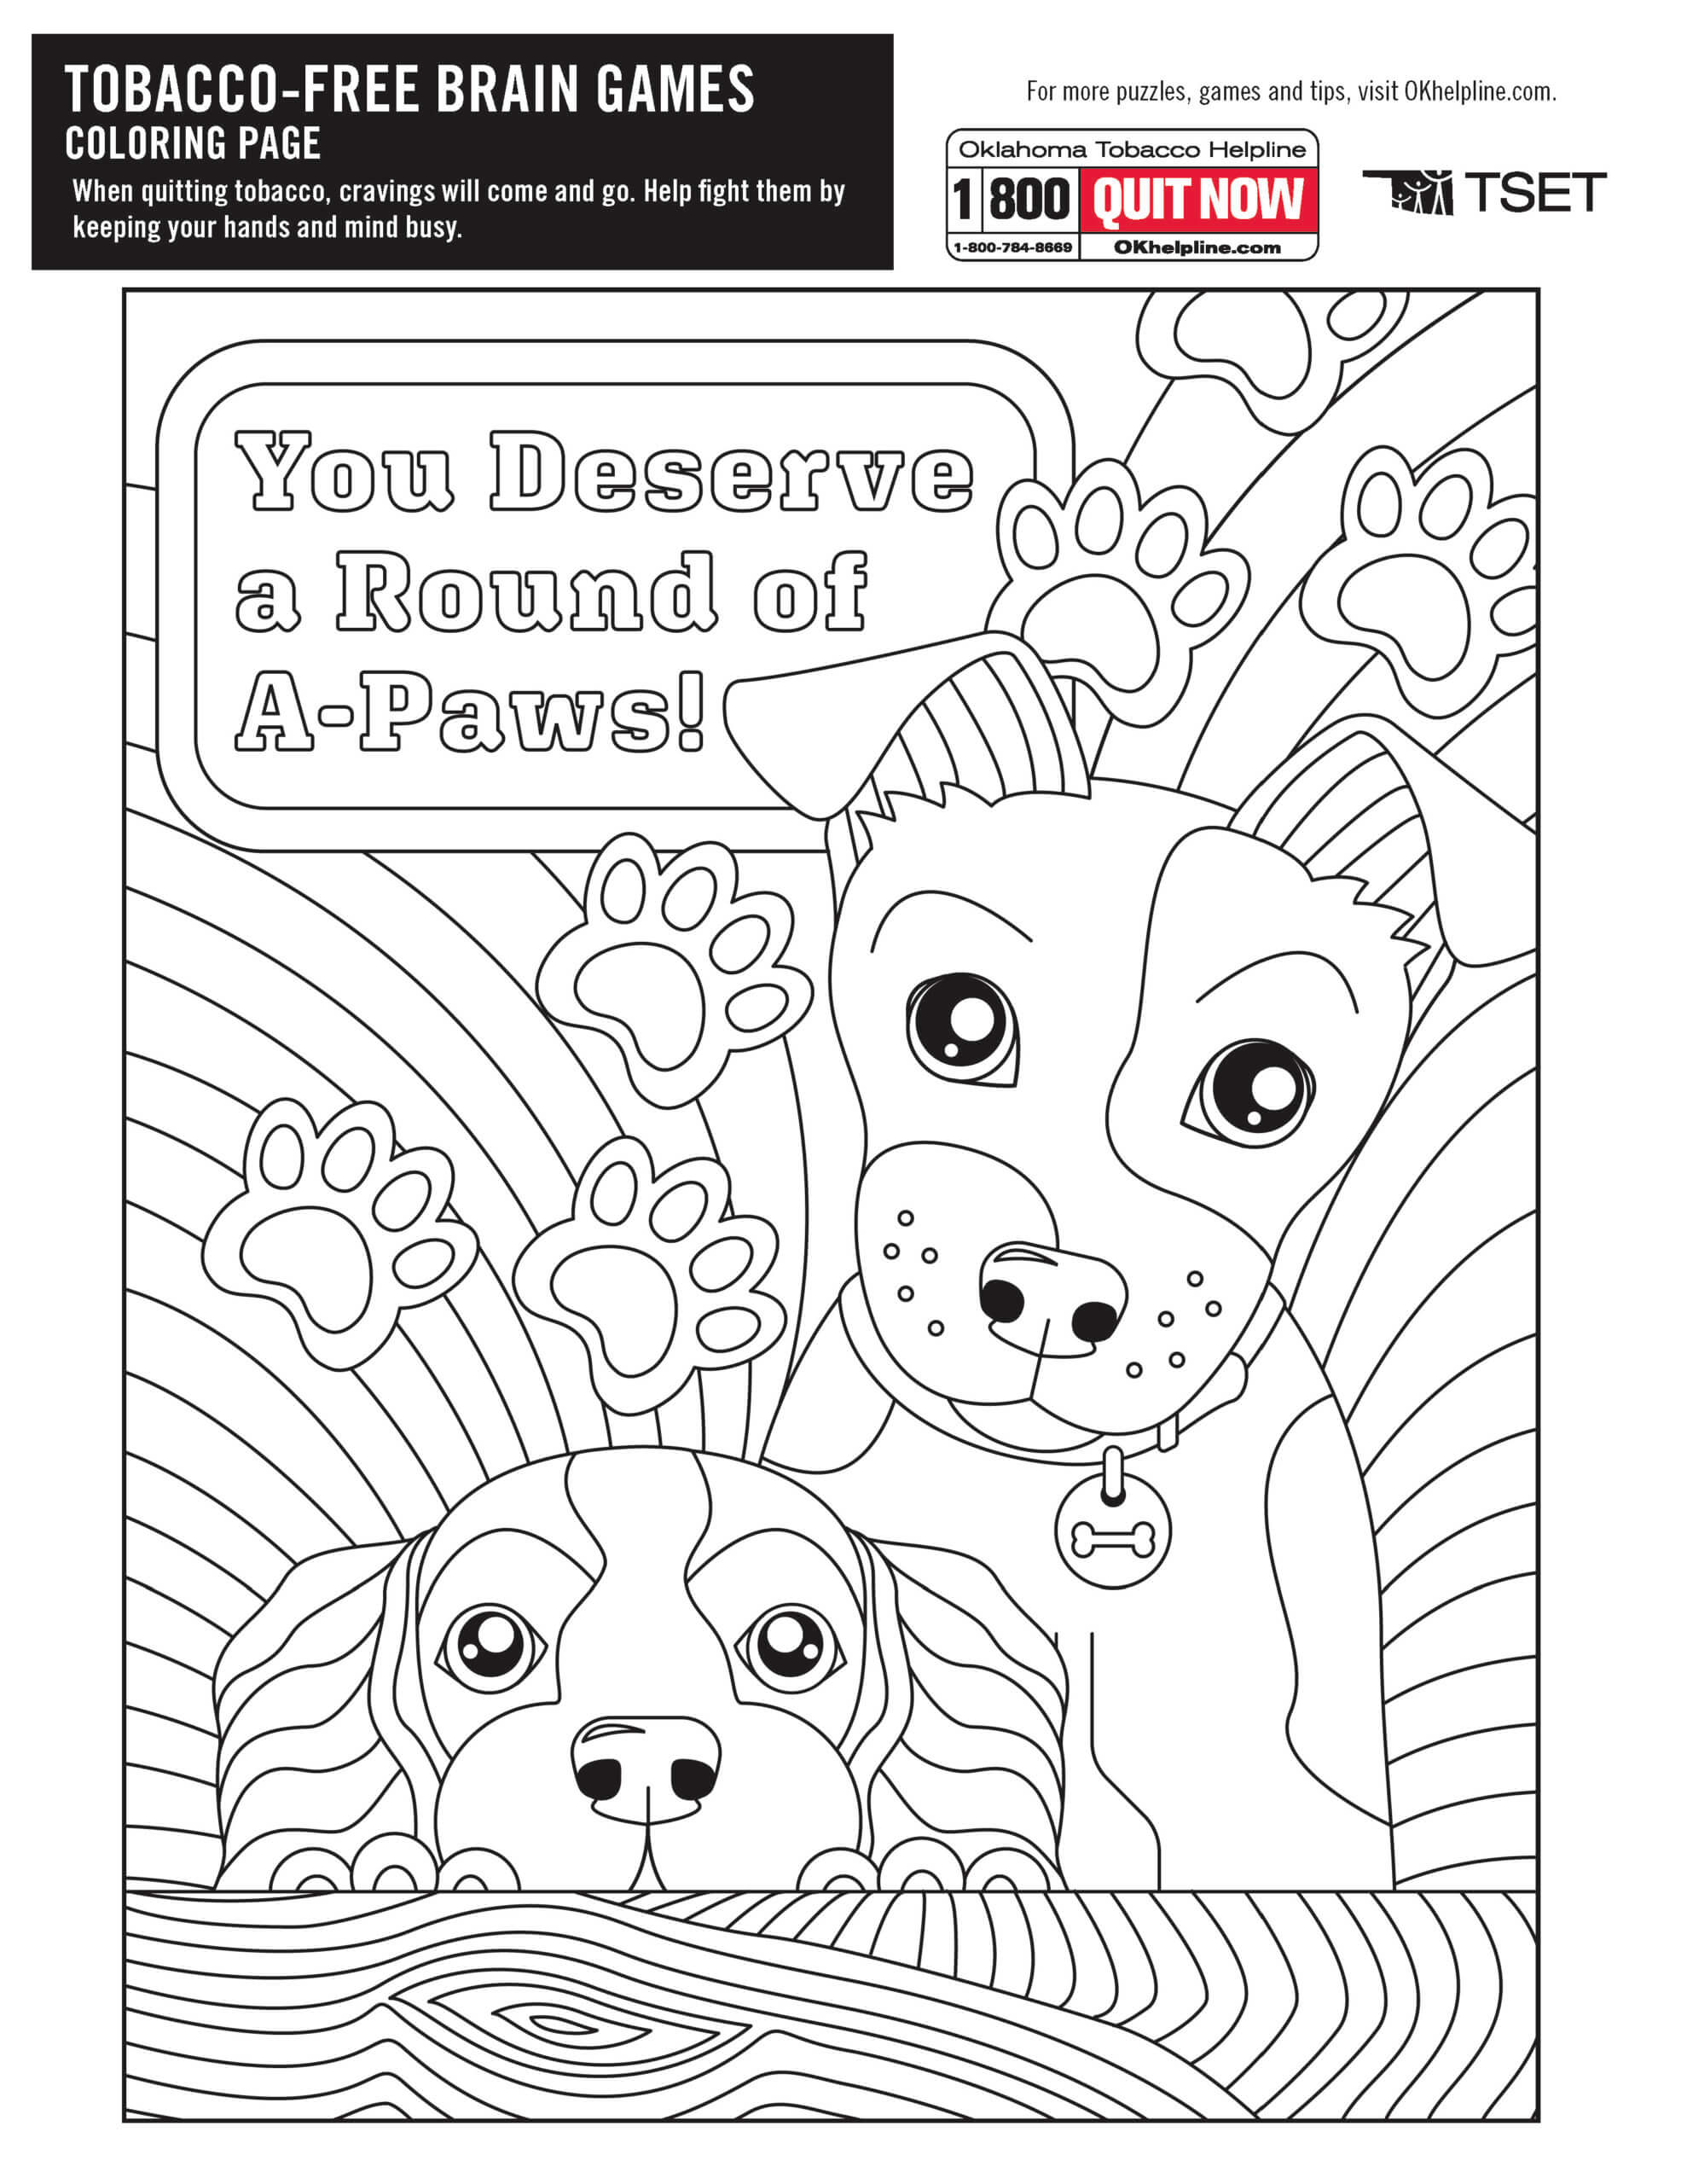 Adult coloring pages free coloring pages online